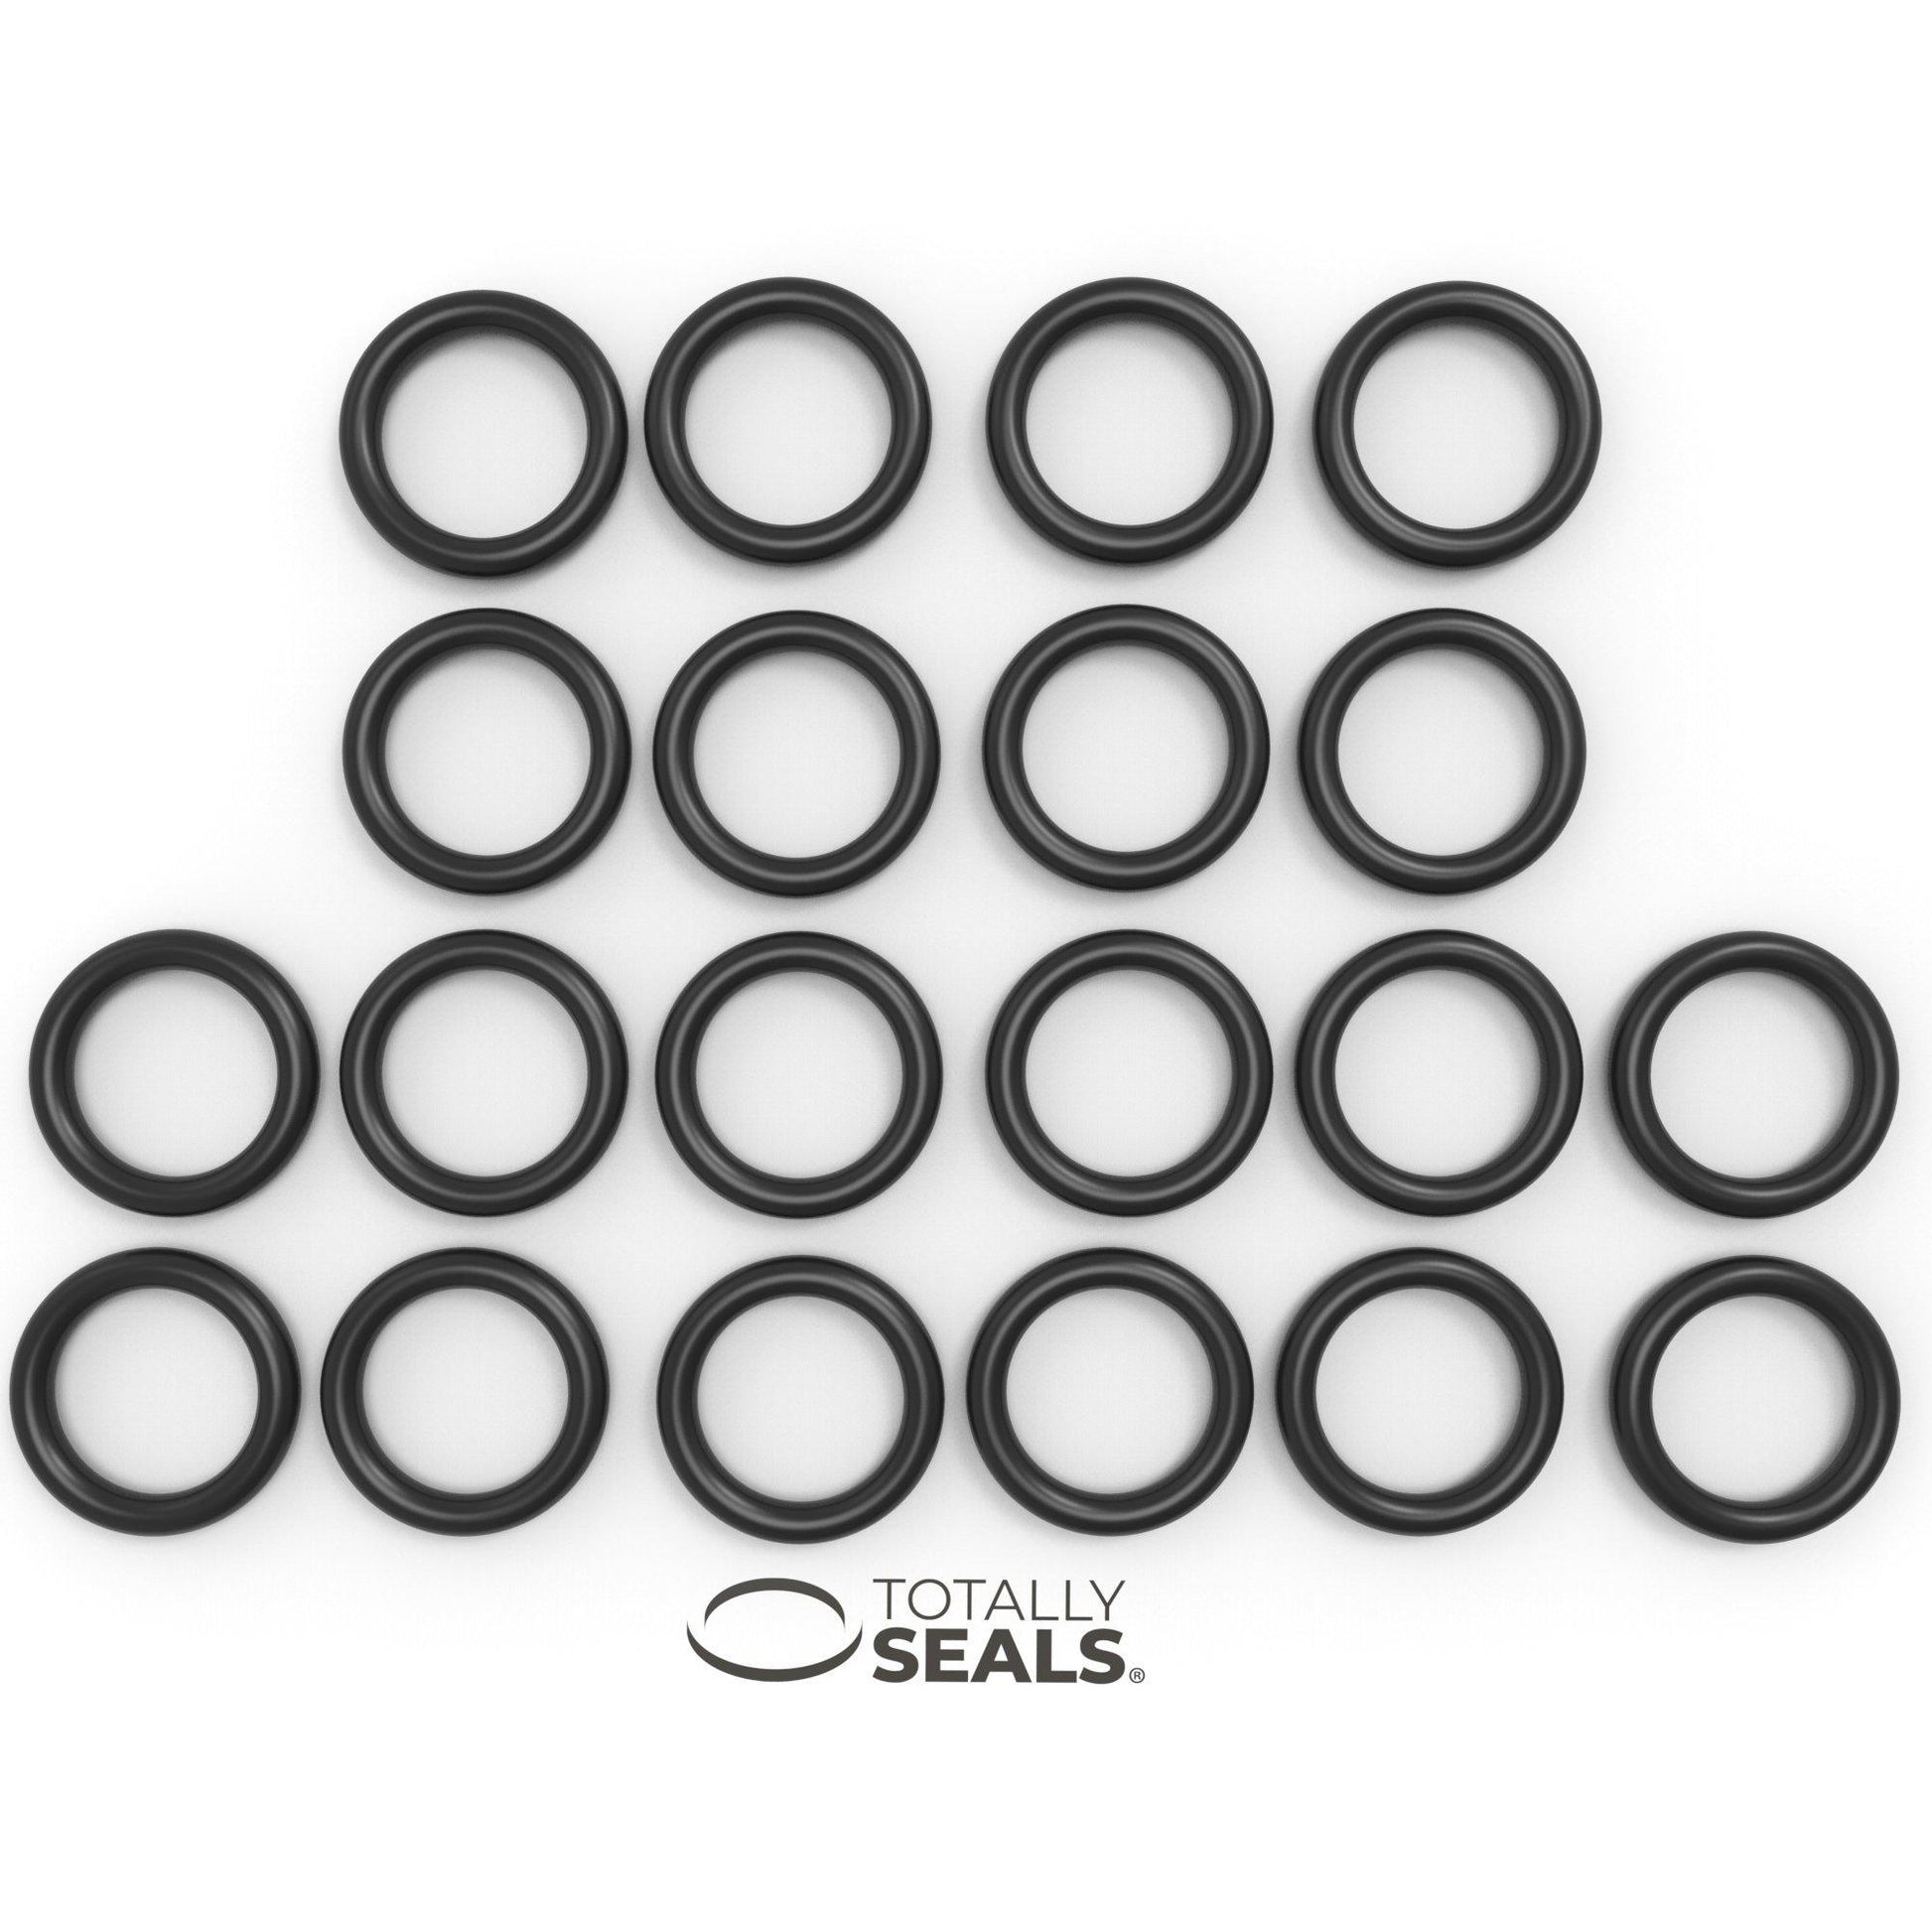 27mm x 2mm (31mm OD) Nitrile O-Rings - Totally Seals®